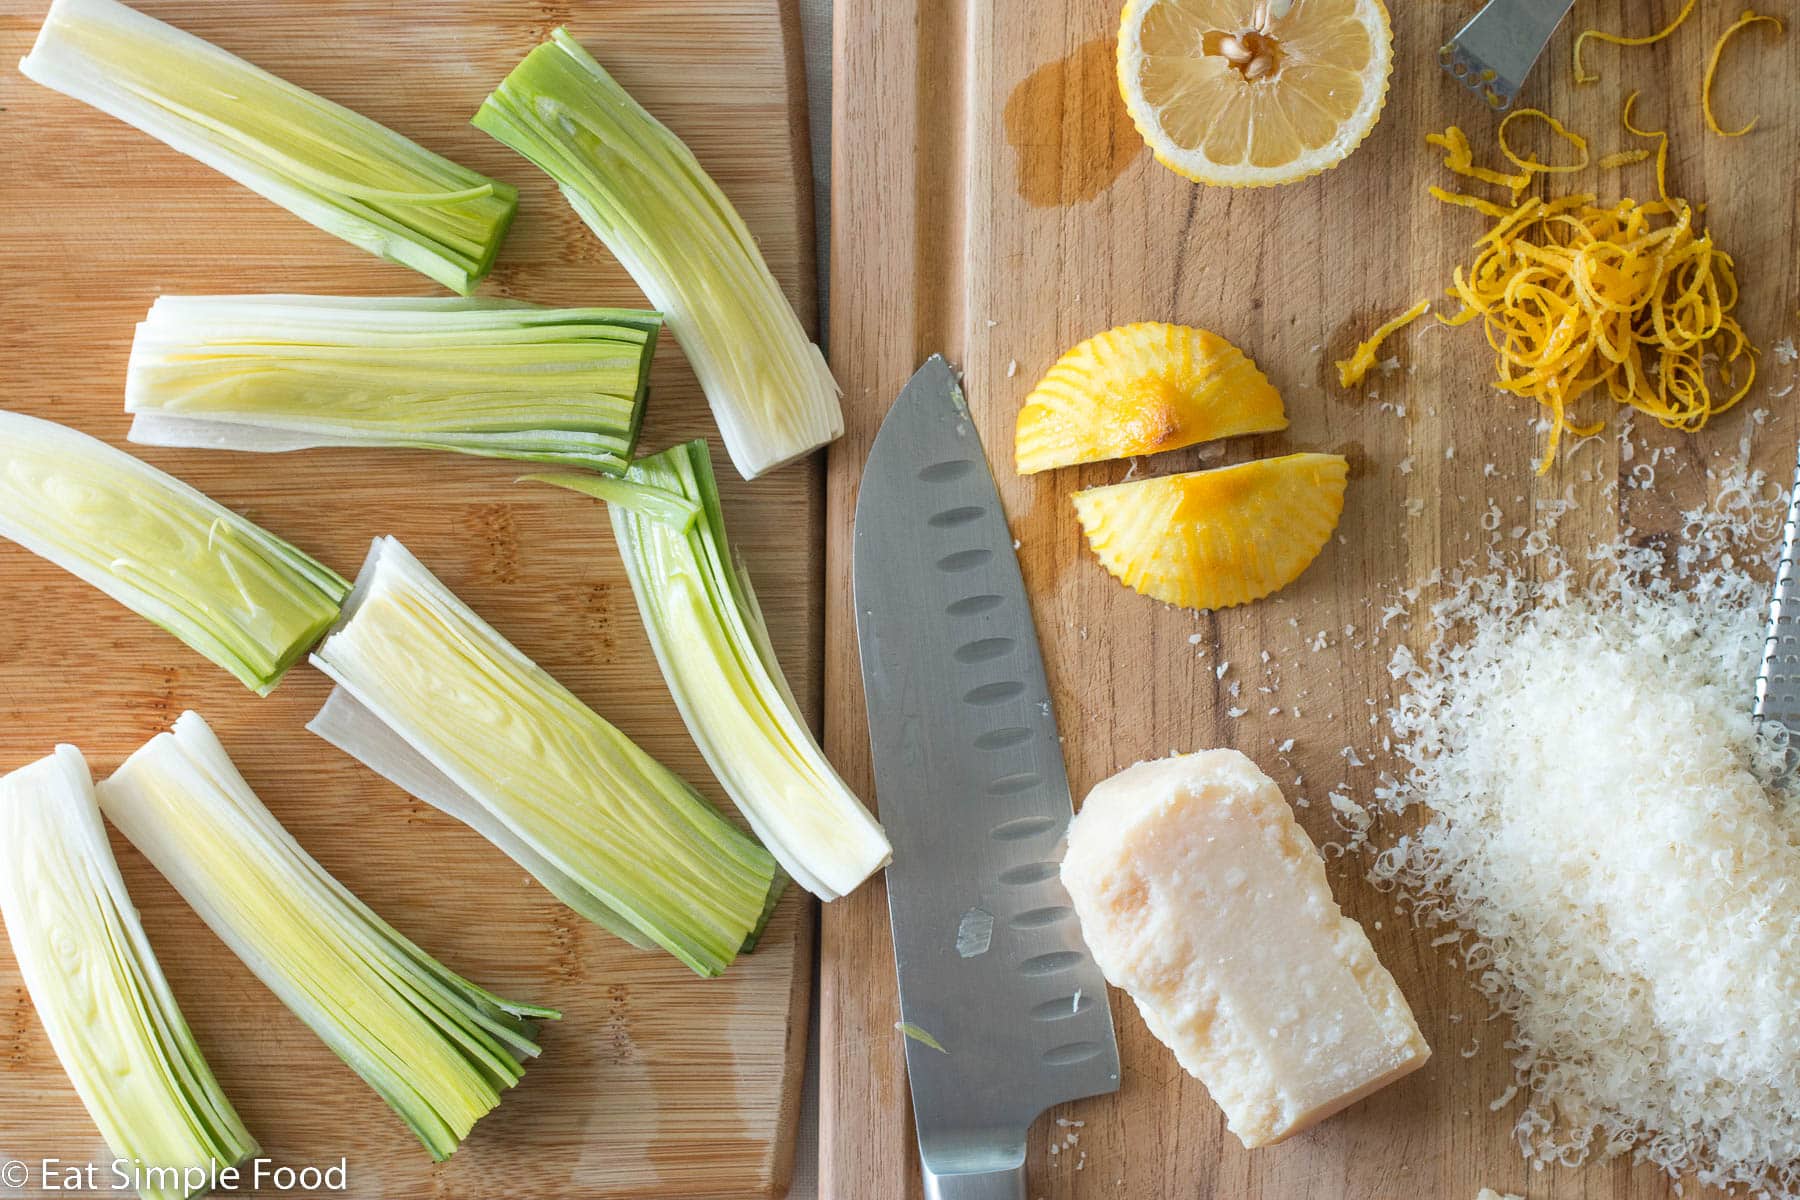 Top down view of 8 pieces of halved leeks, lemon zest, lemon halves, shredded parmesan cheese, a chunk of parmesan cheese, and a chefs knife on a wood cutting board.